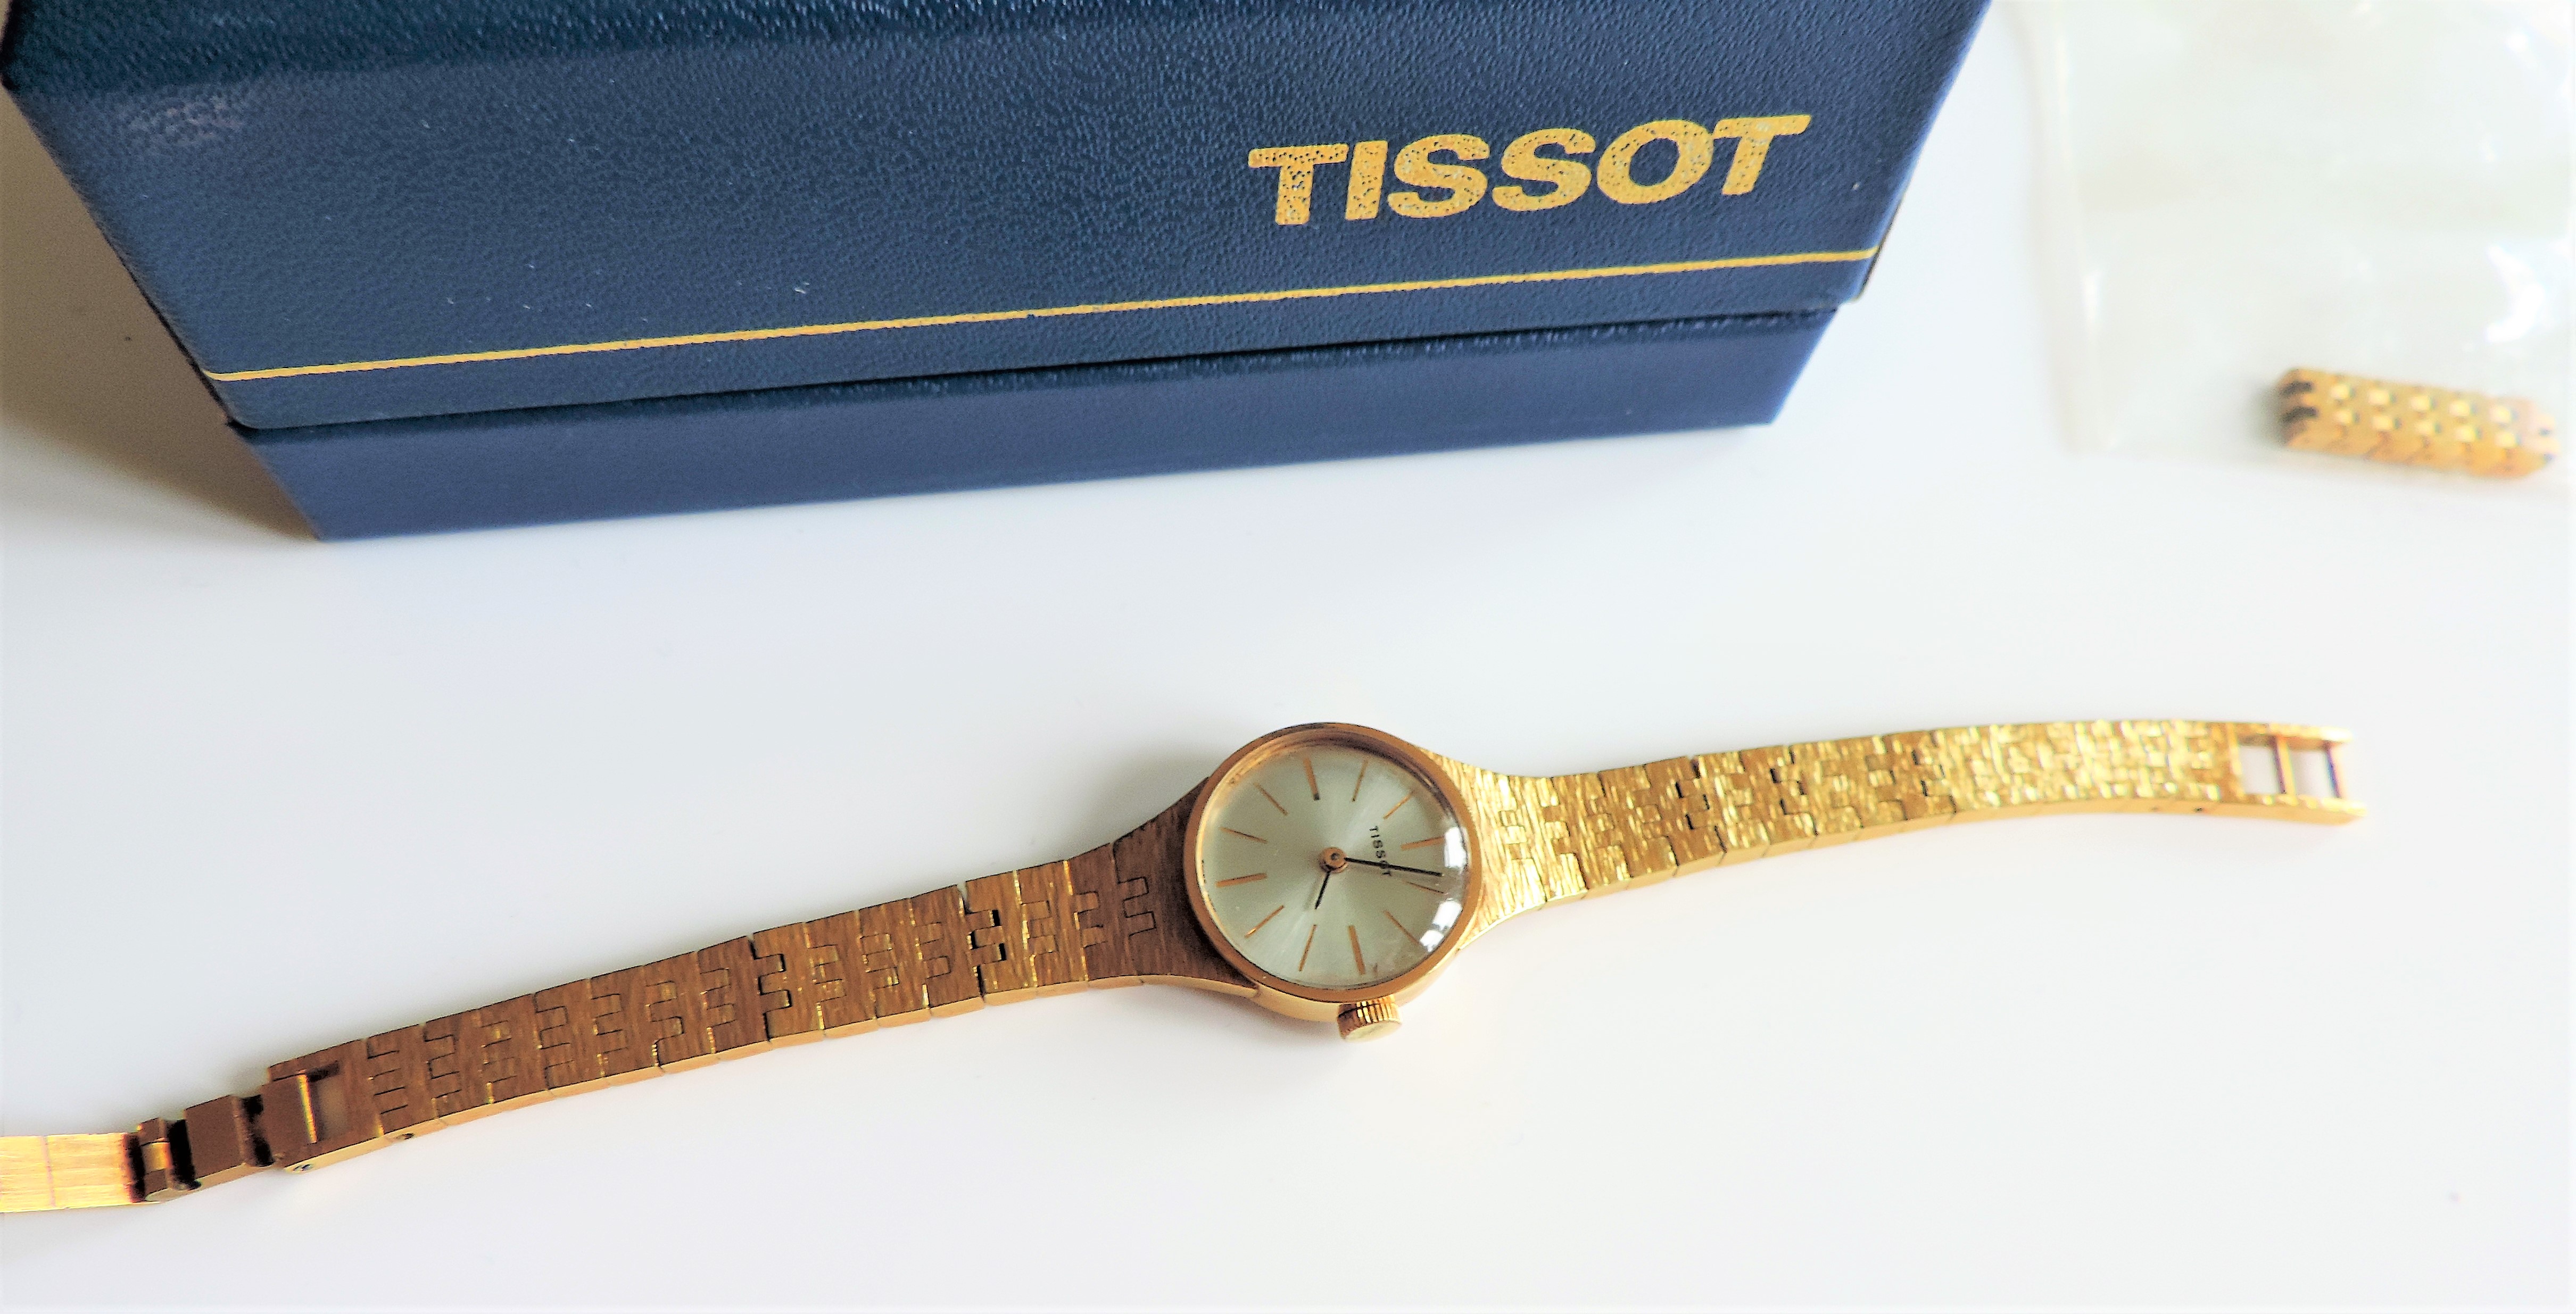 Vintage Ladies Tissot Gold Plated Watch - Image 6 of 7